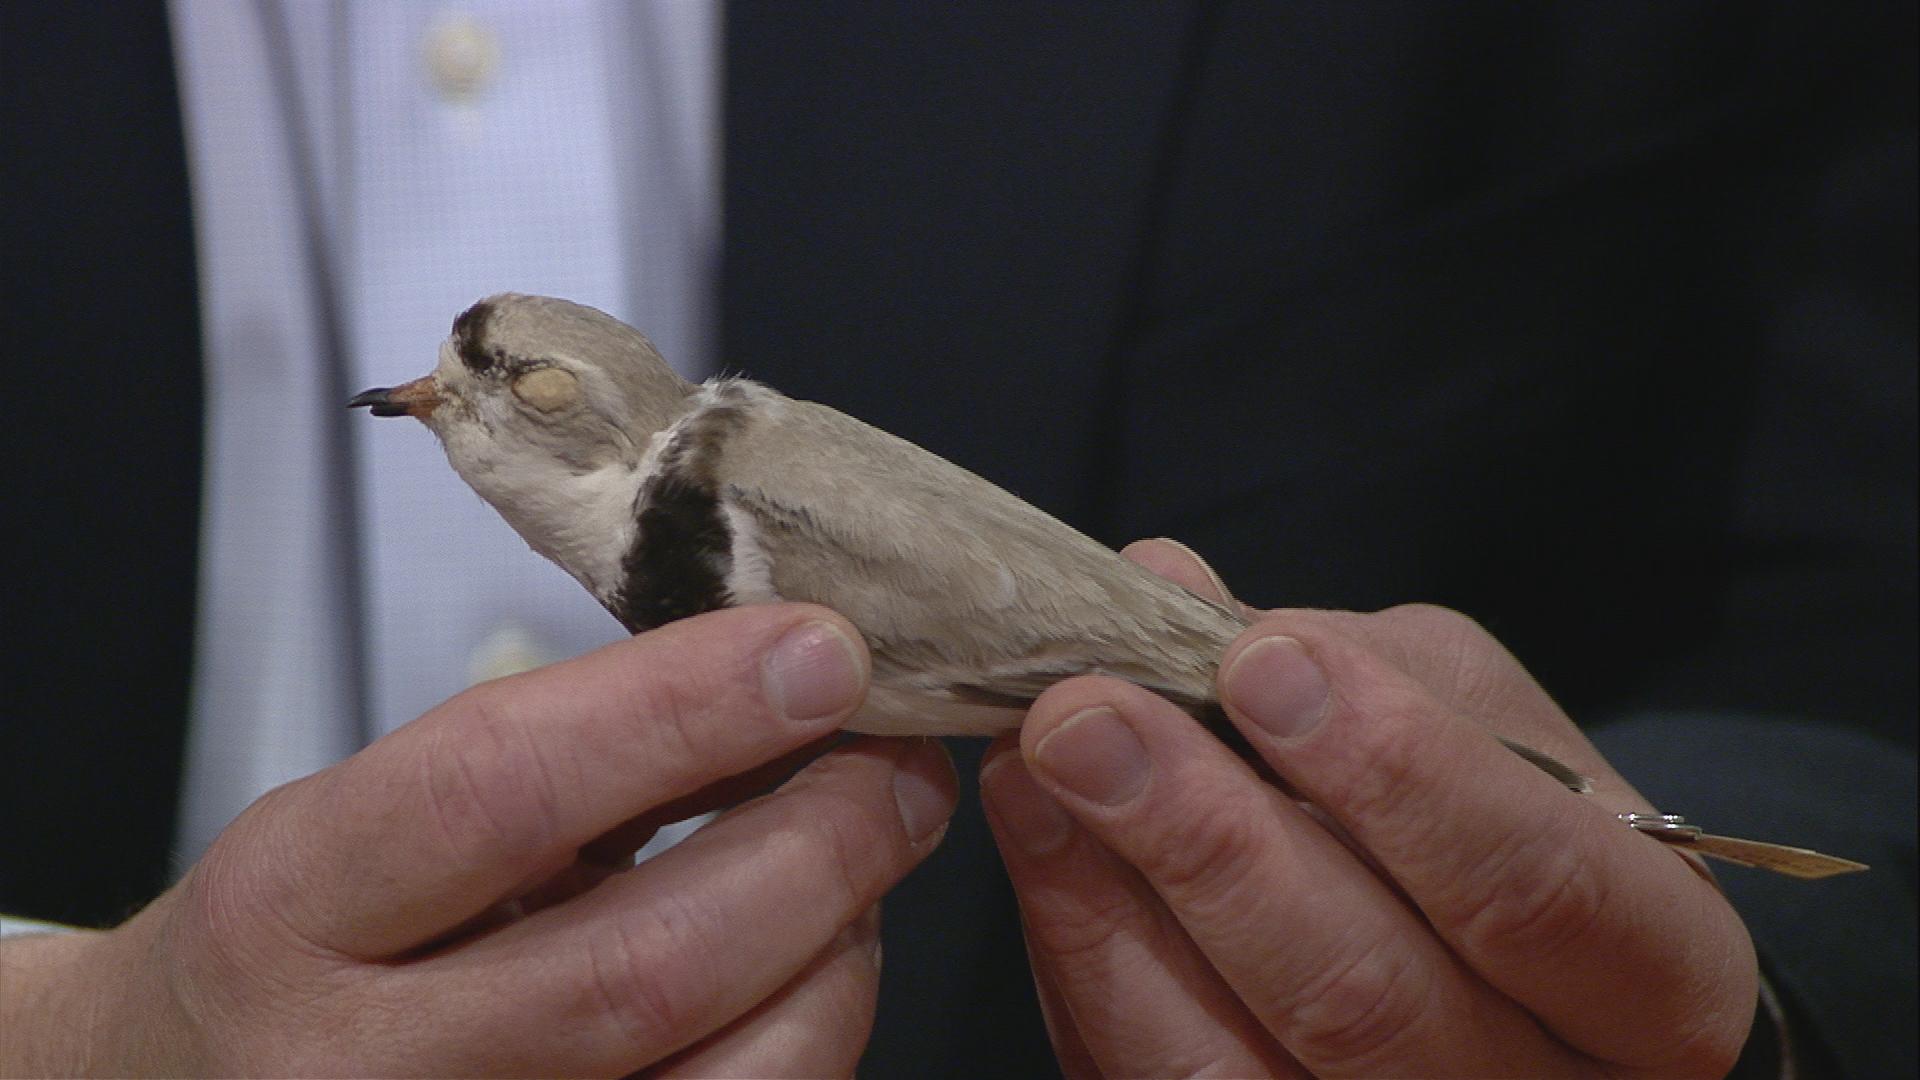 Marra shows a piping plover specimen during the interview. “It's a species that's also commonly under threat because of outdoor cats,” he said.